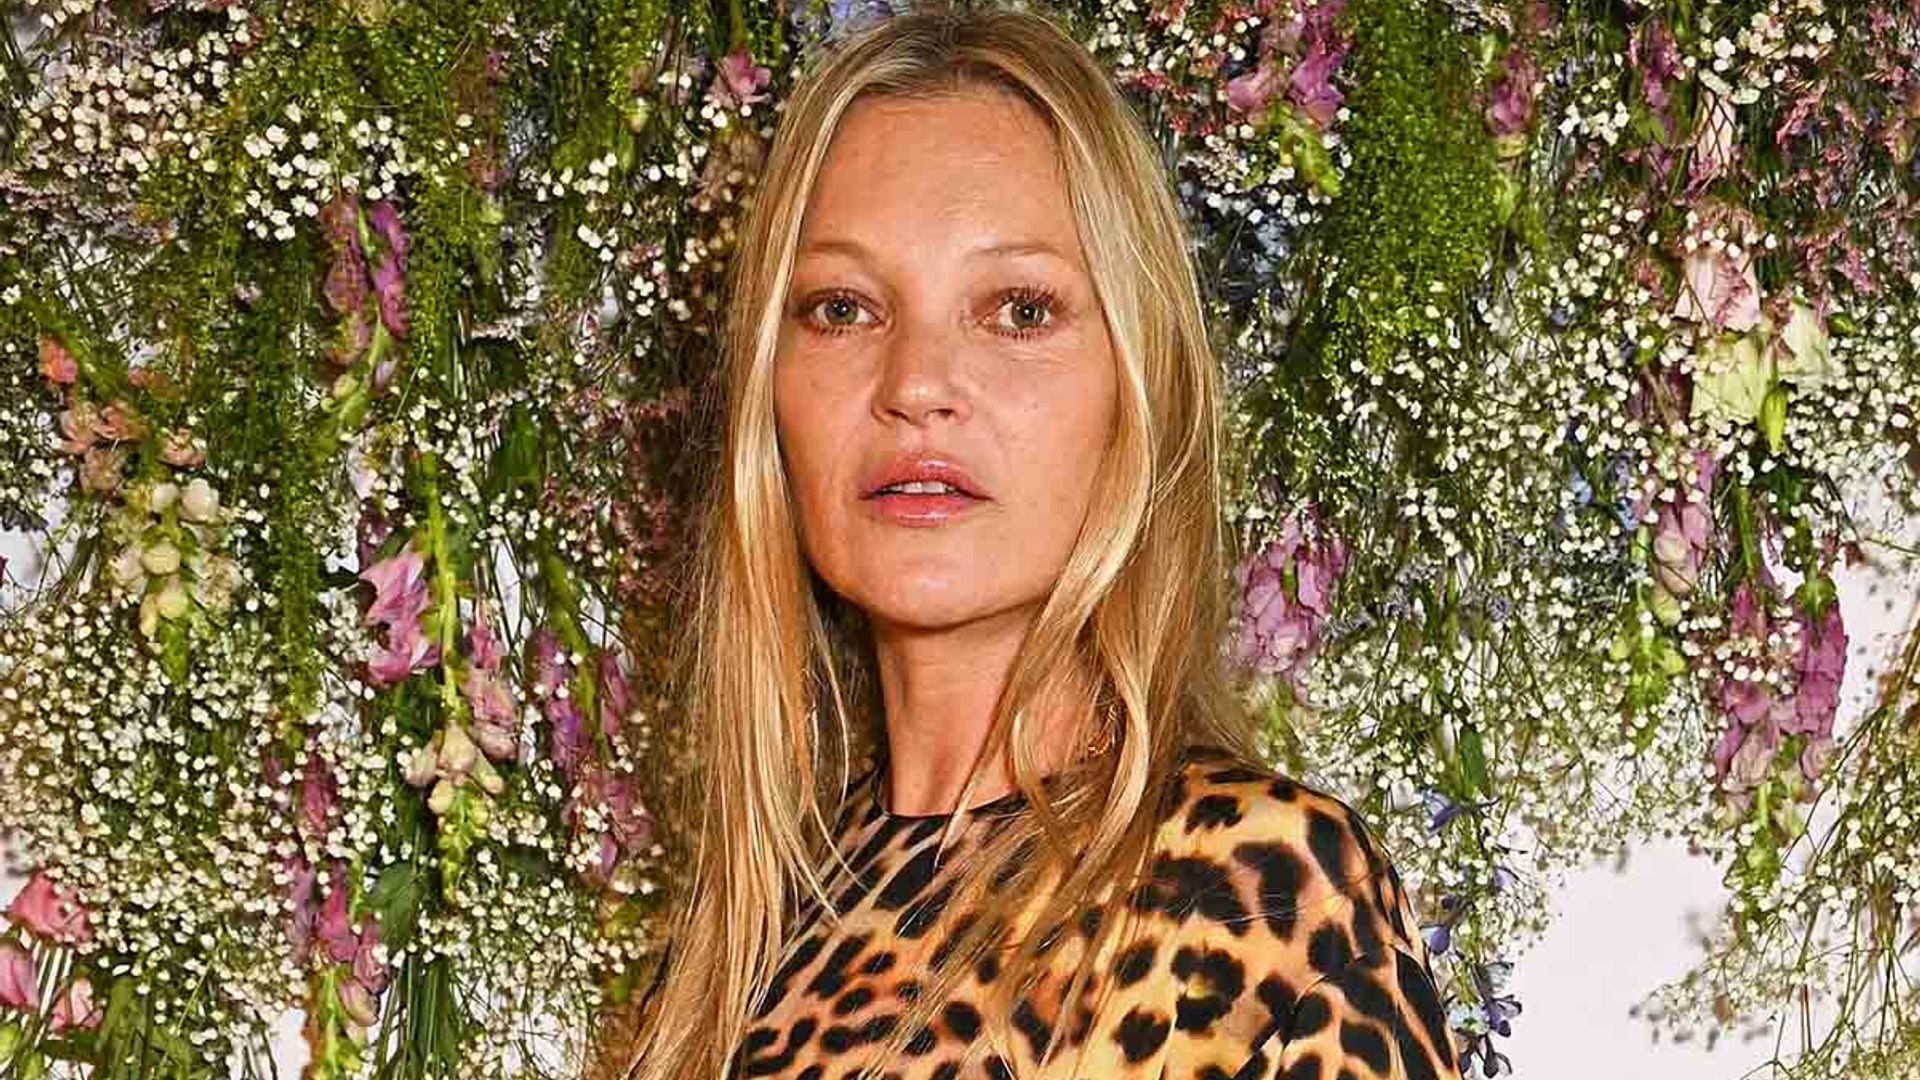 Everything you need to know about Kate Moss' family life